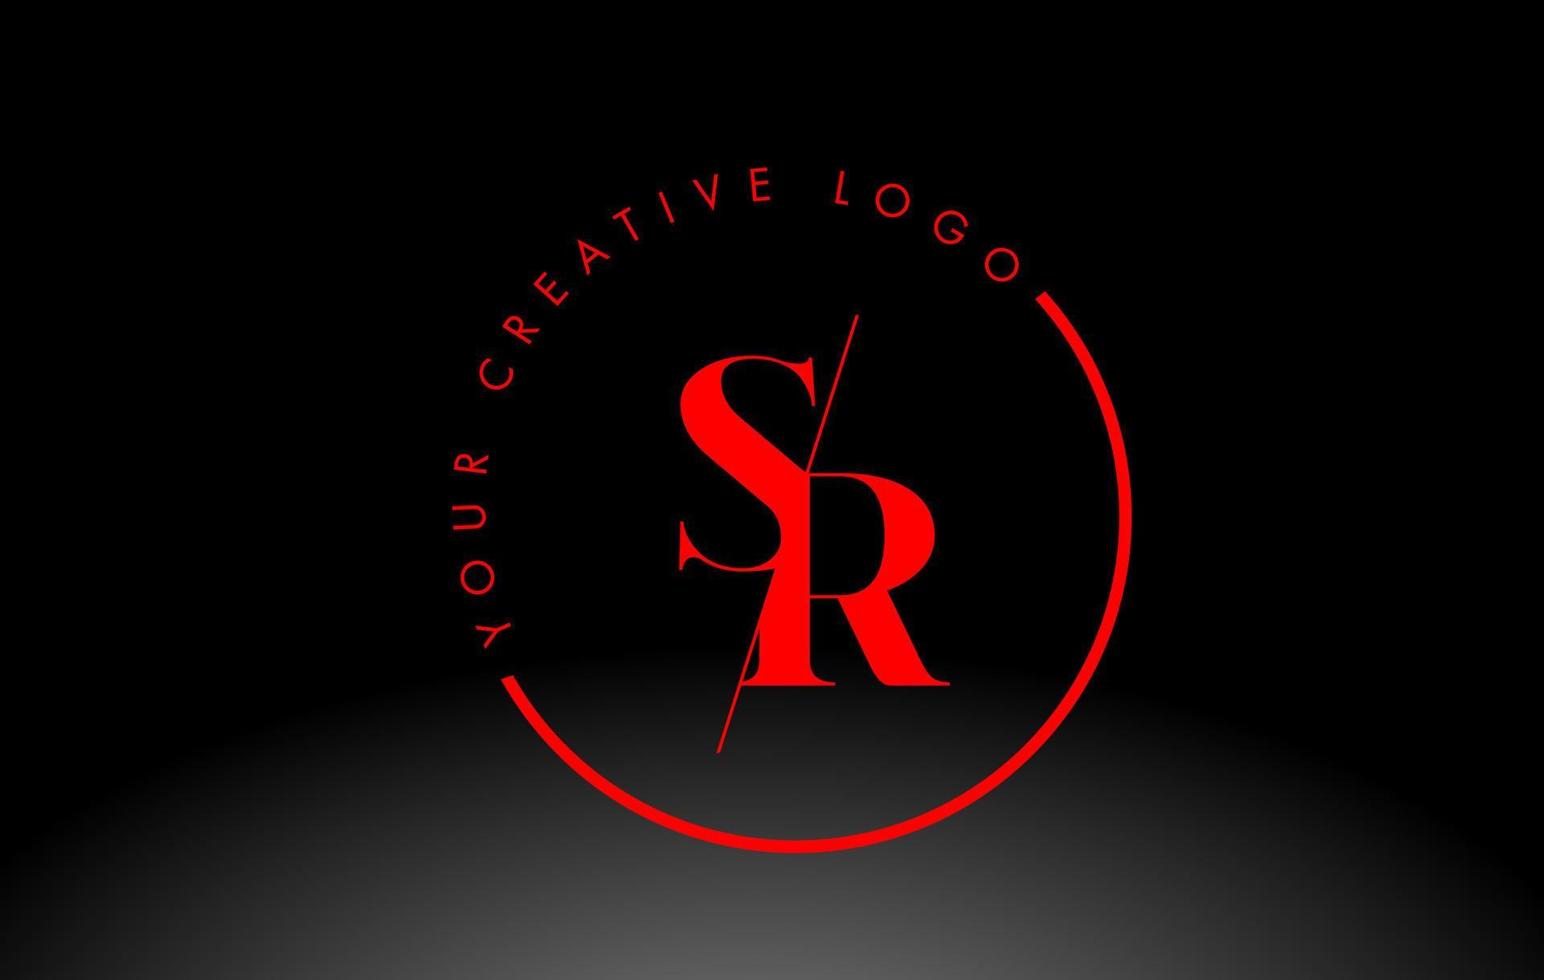 Red SR Serif Letter Logo Design with Creative Intersected Cut. vector